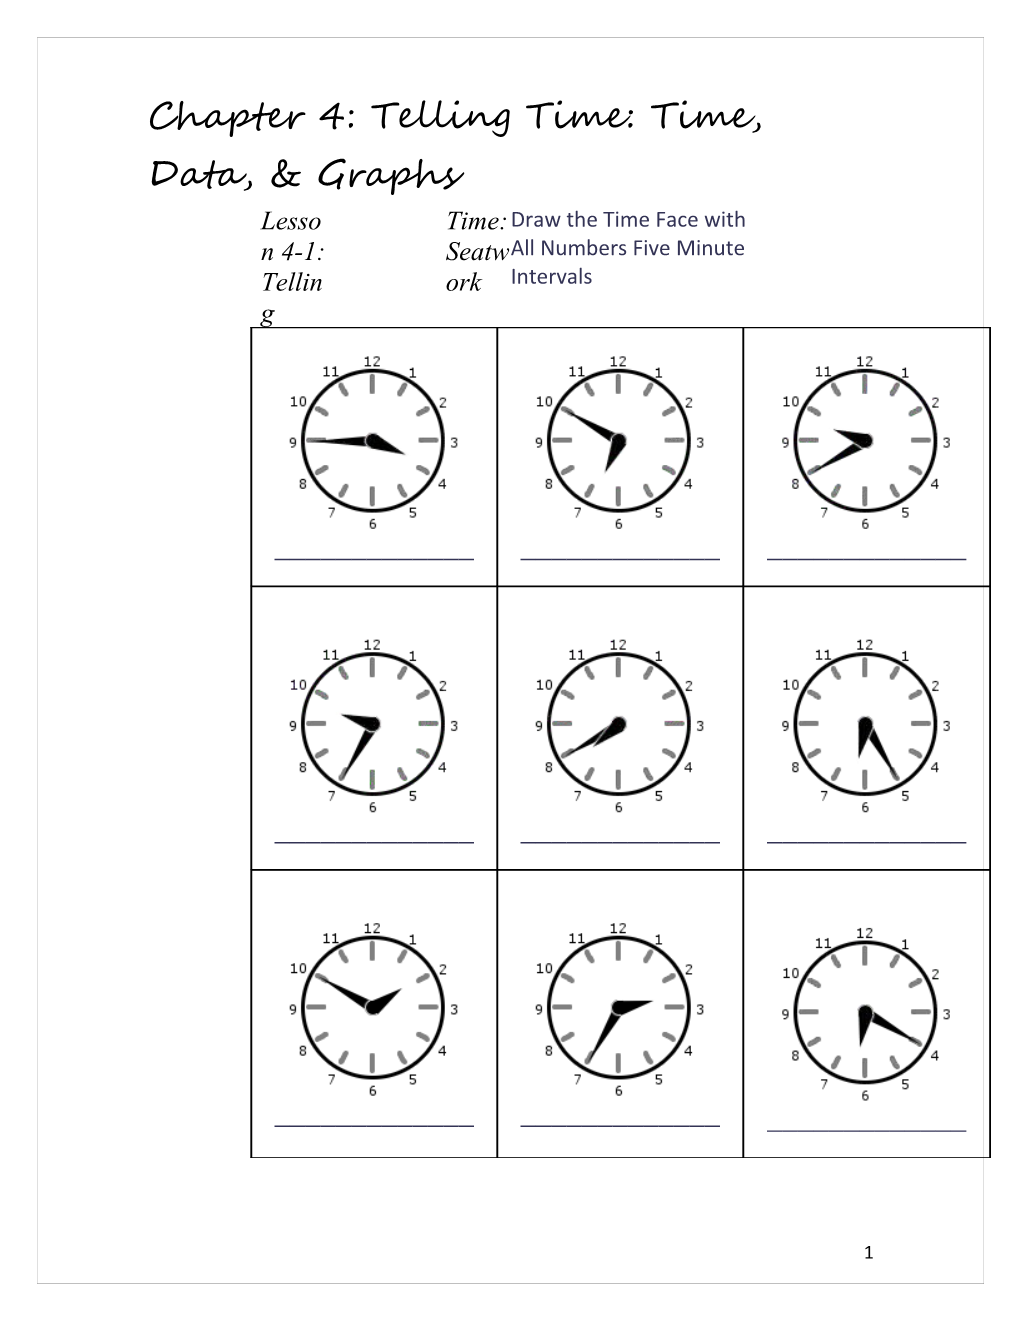 Chapter 4: Telling Time: Time, Data, & Graphs